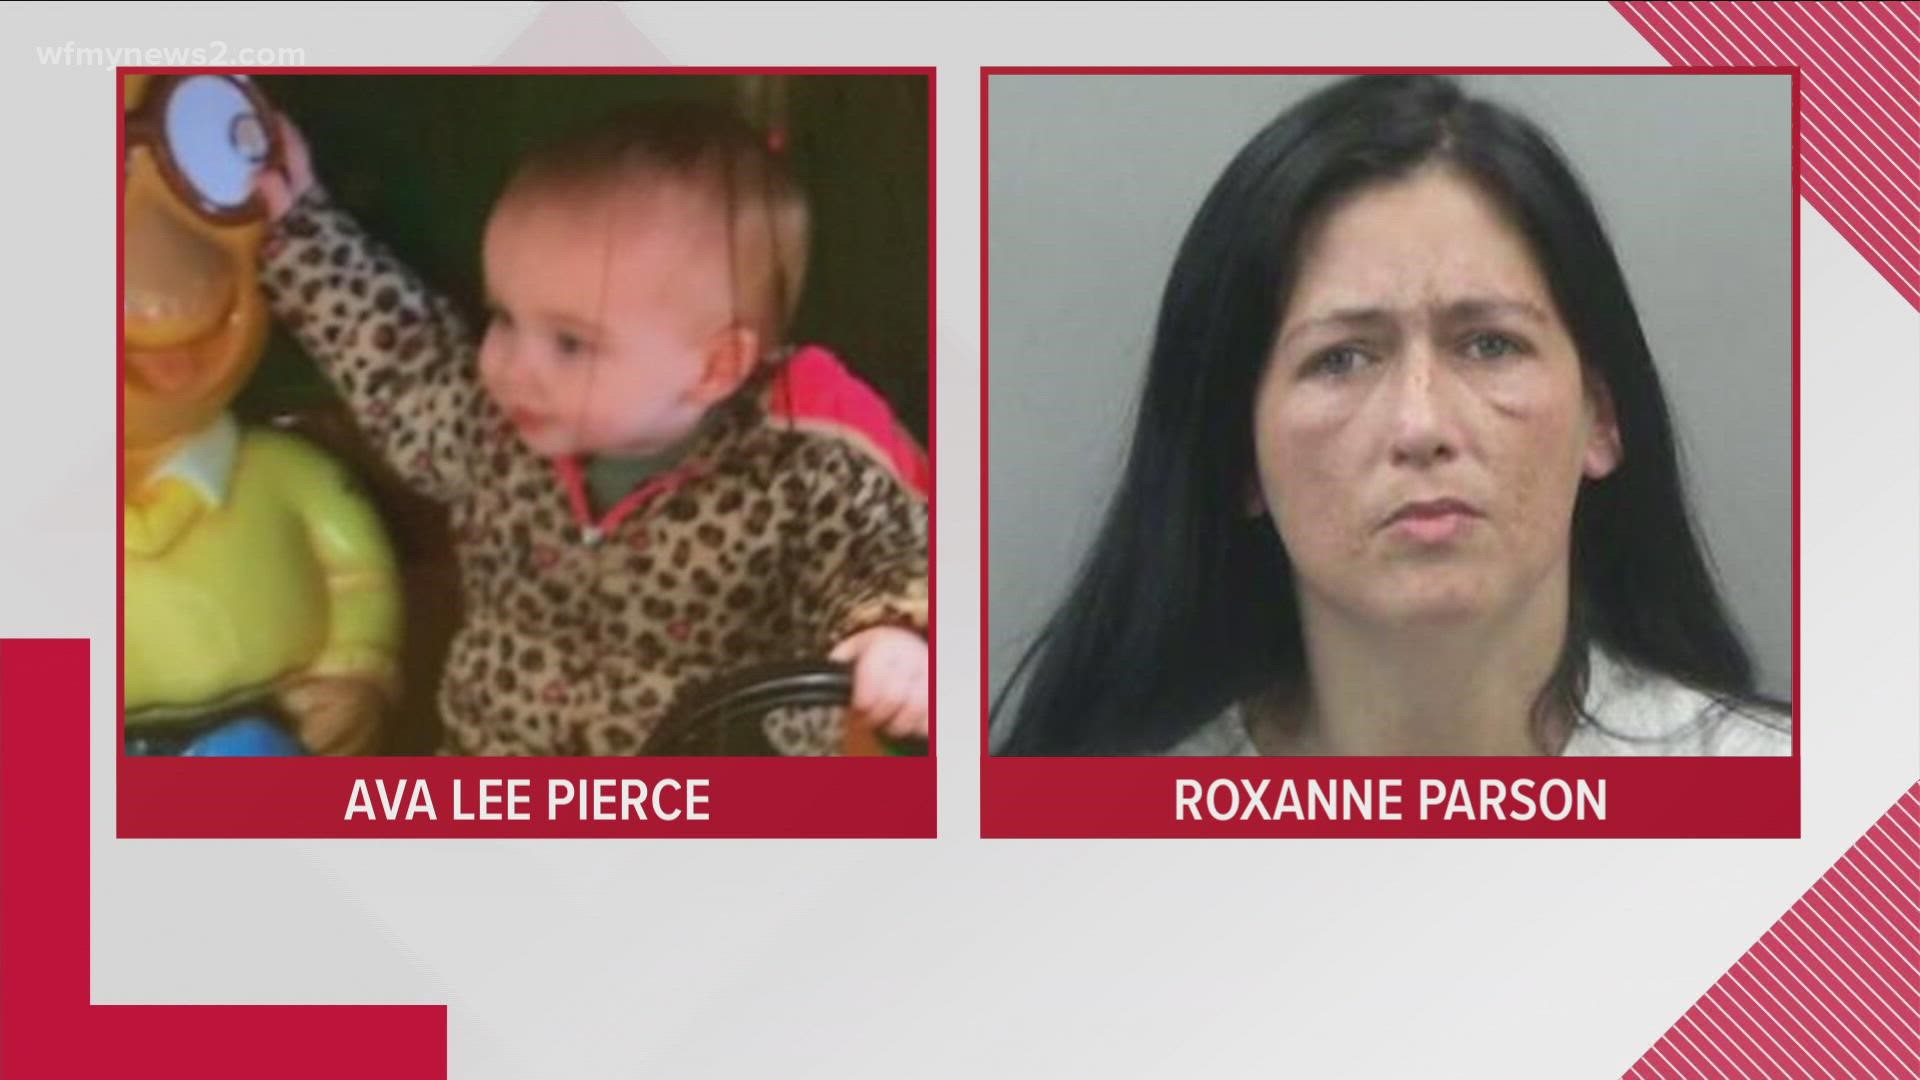 Deputies believe Roxanne Parson abducted her daughter, 1-year-old Ava Pierce. Parson does not have custody of Ava.